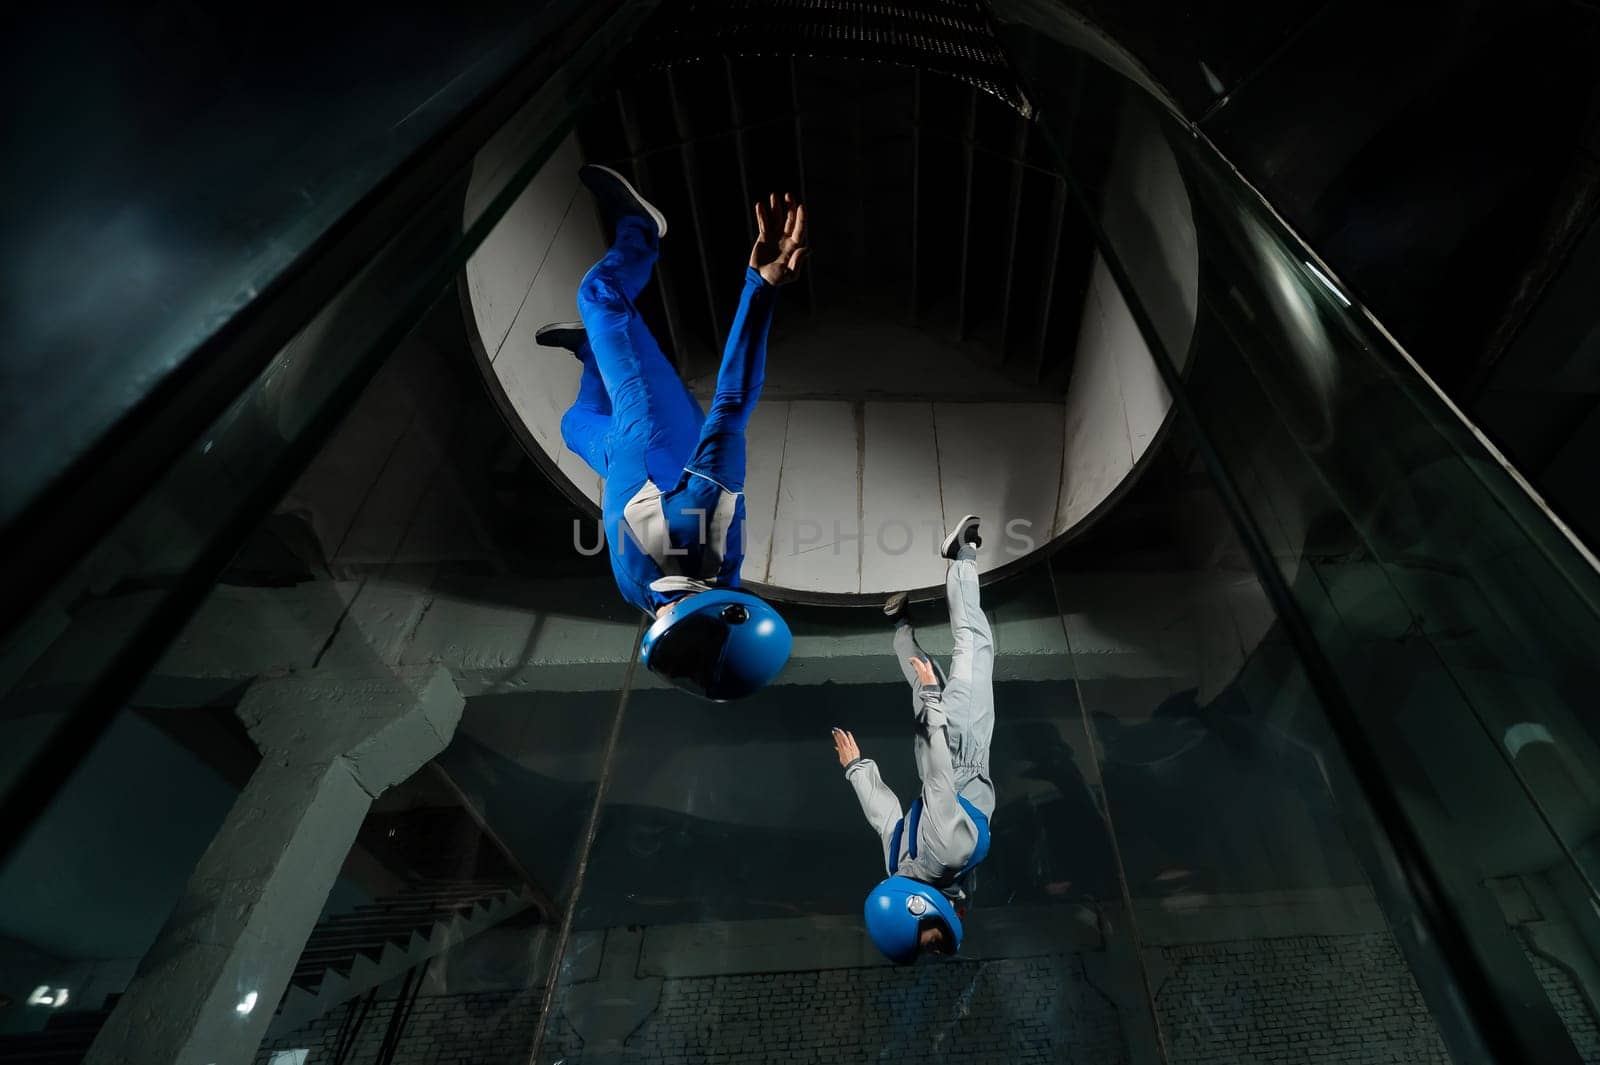 A man and a woman enjoy flying together in a wind tunnel. Free fall simulator.